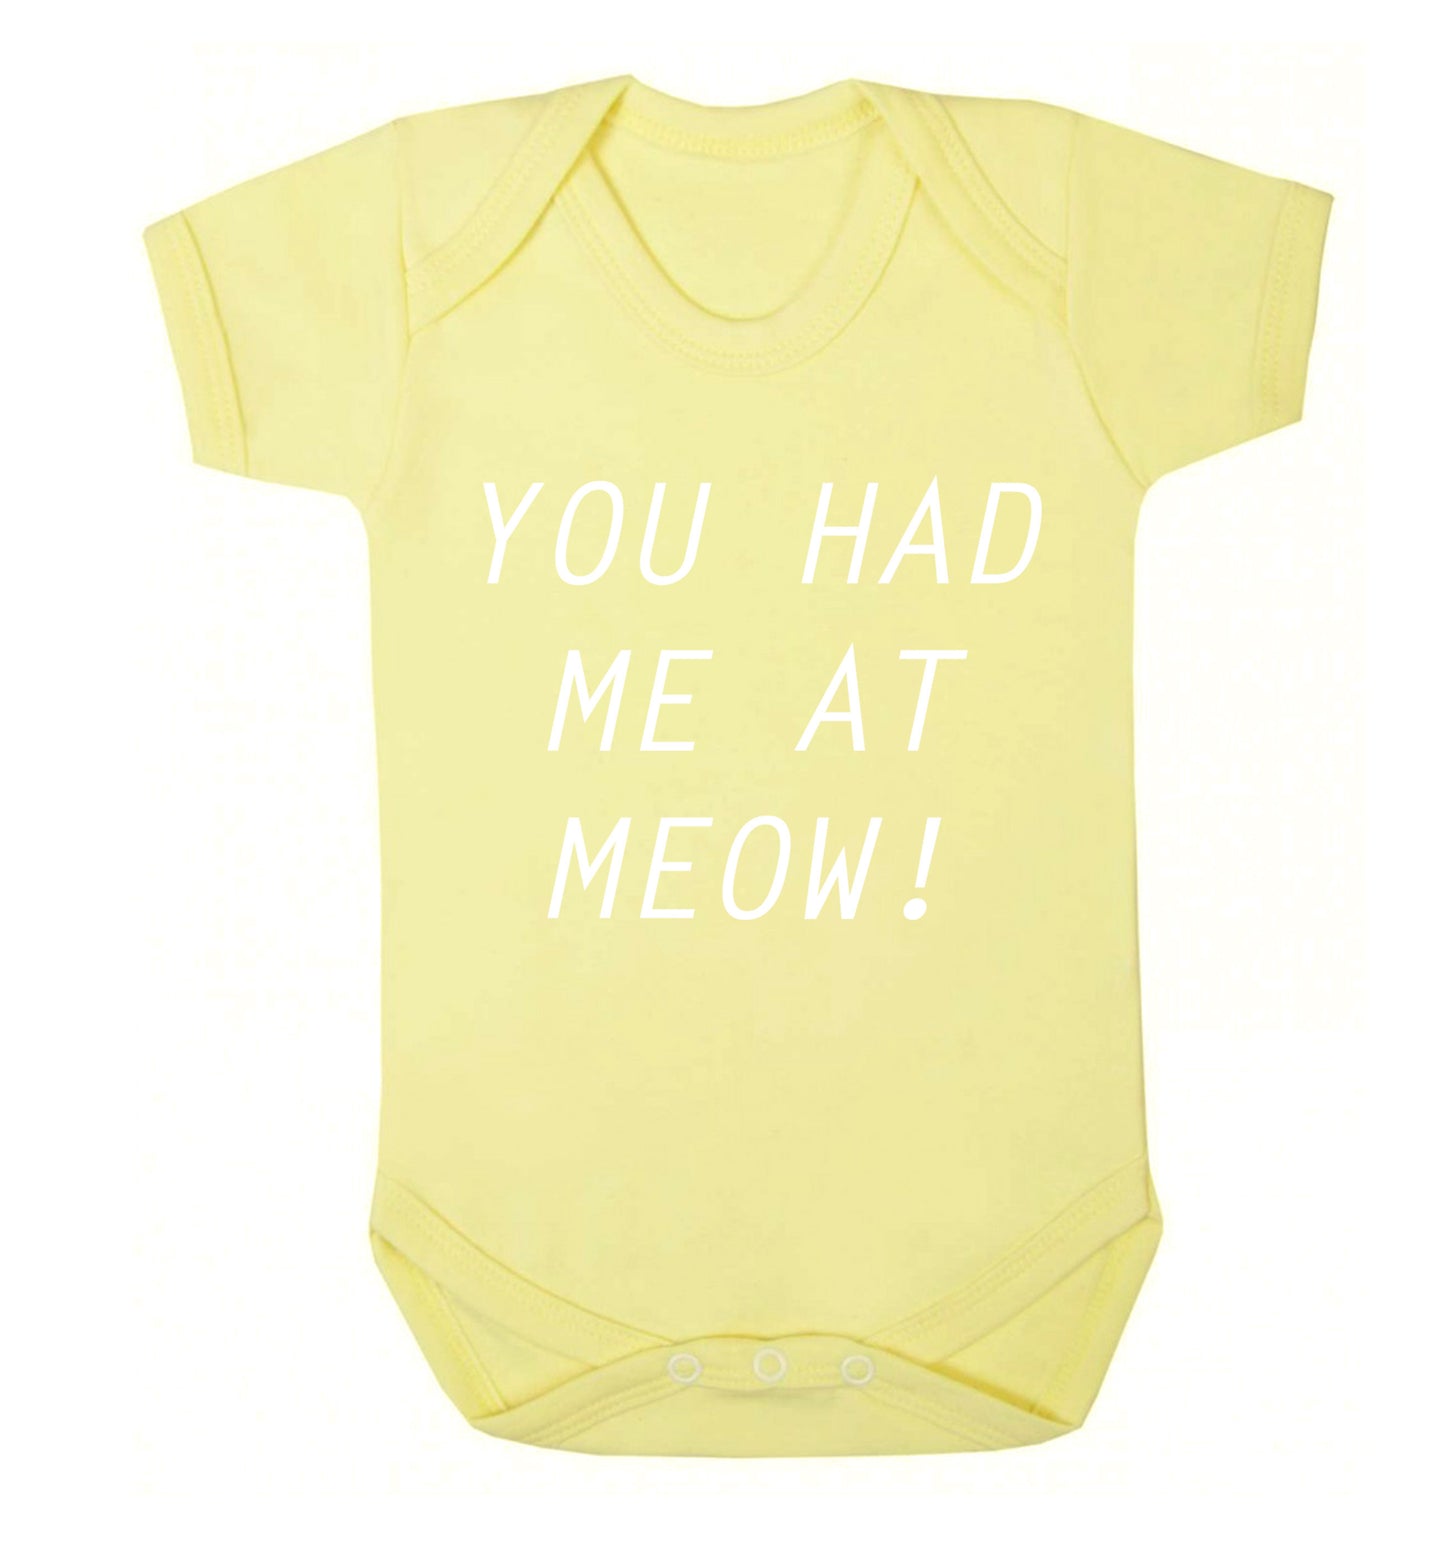 You had me at meow Baby Vest pale yellow 18-24 months